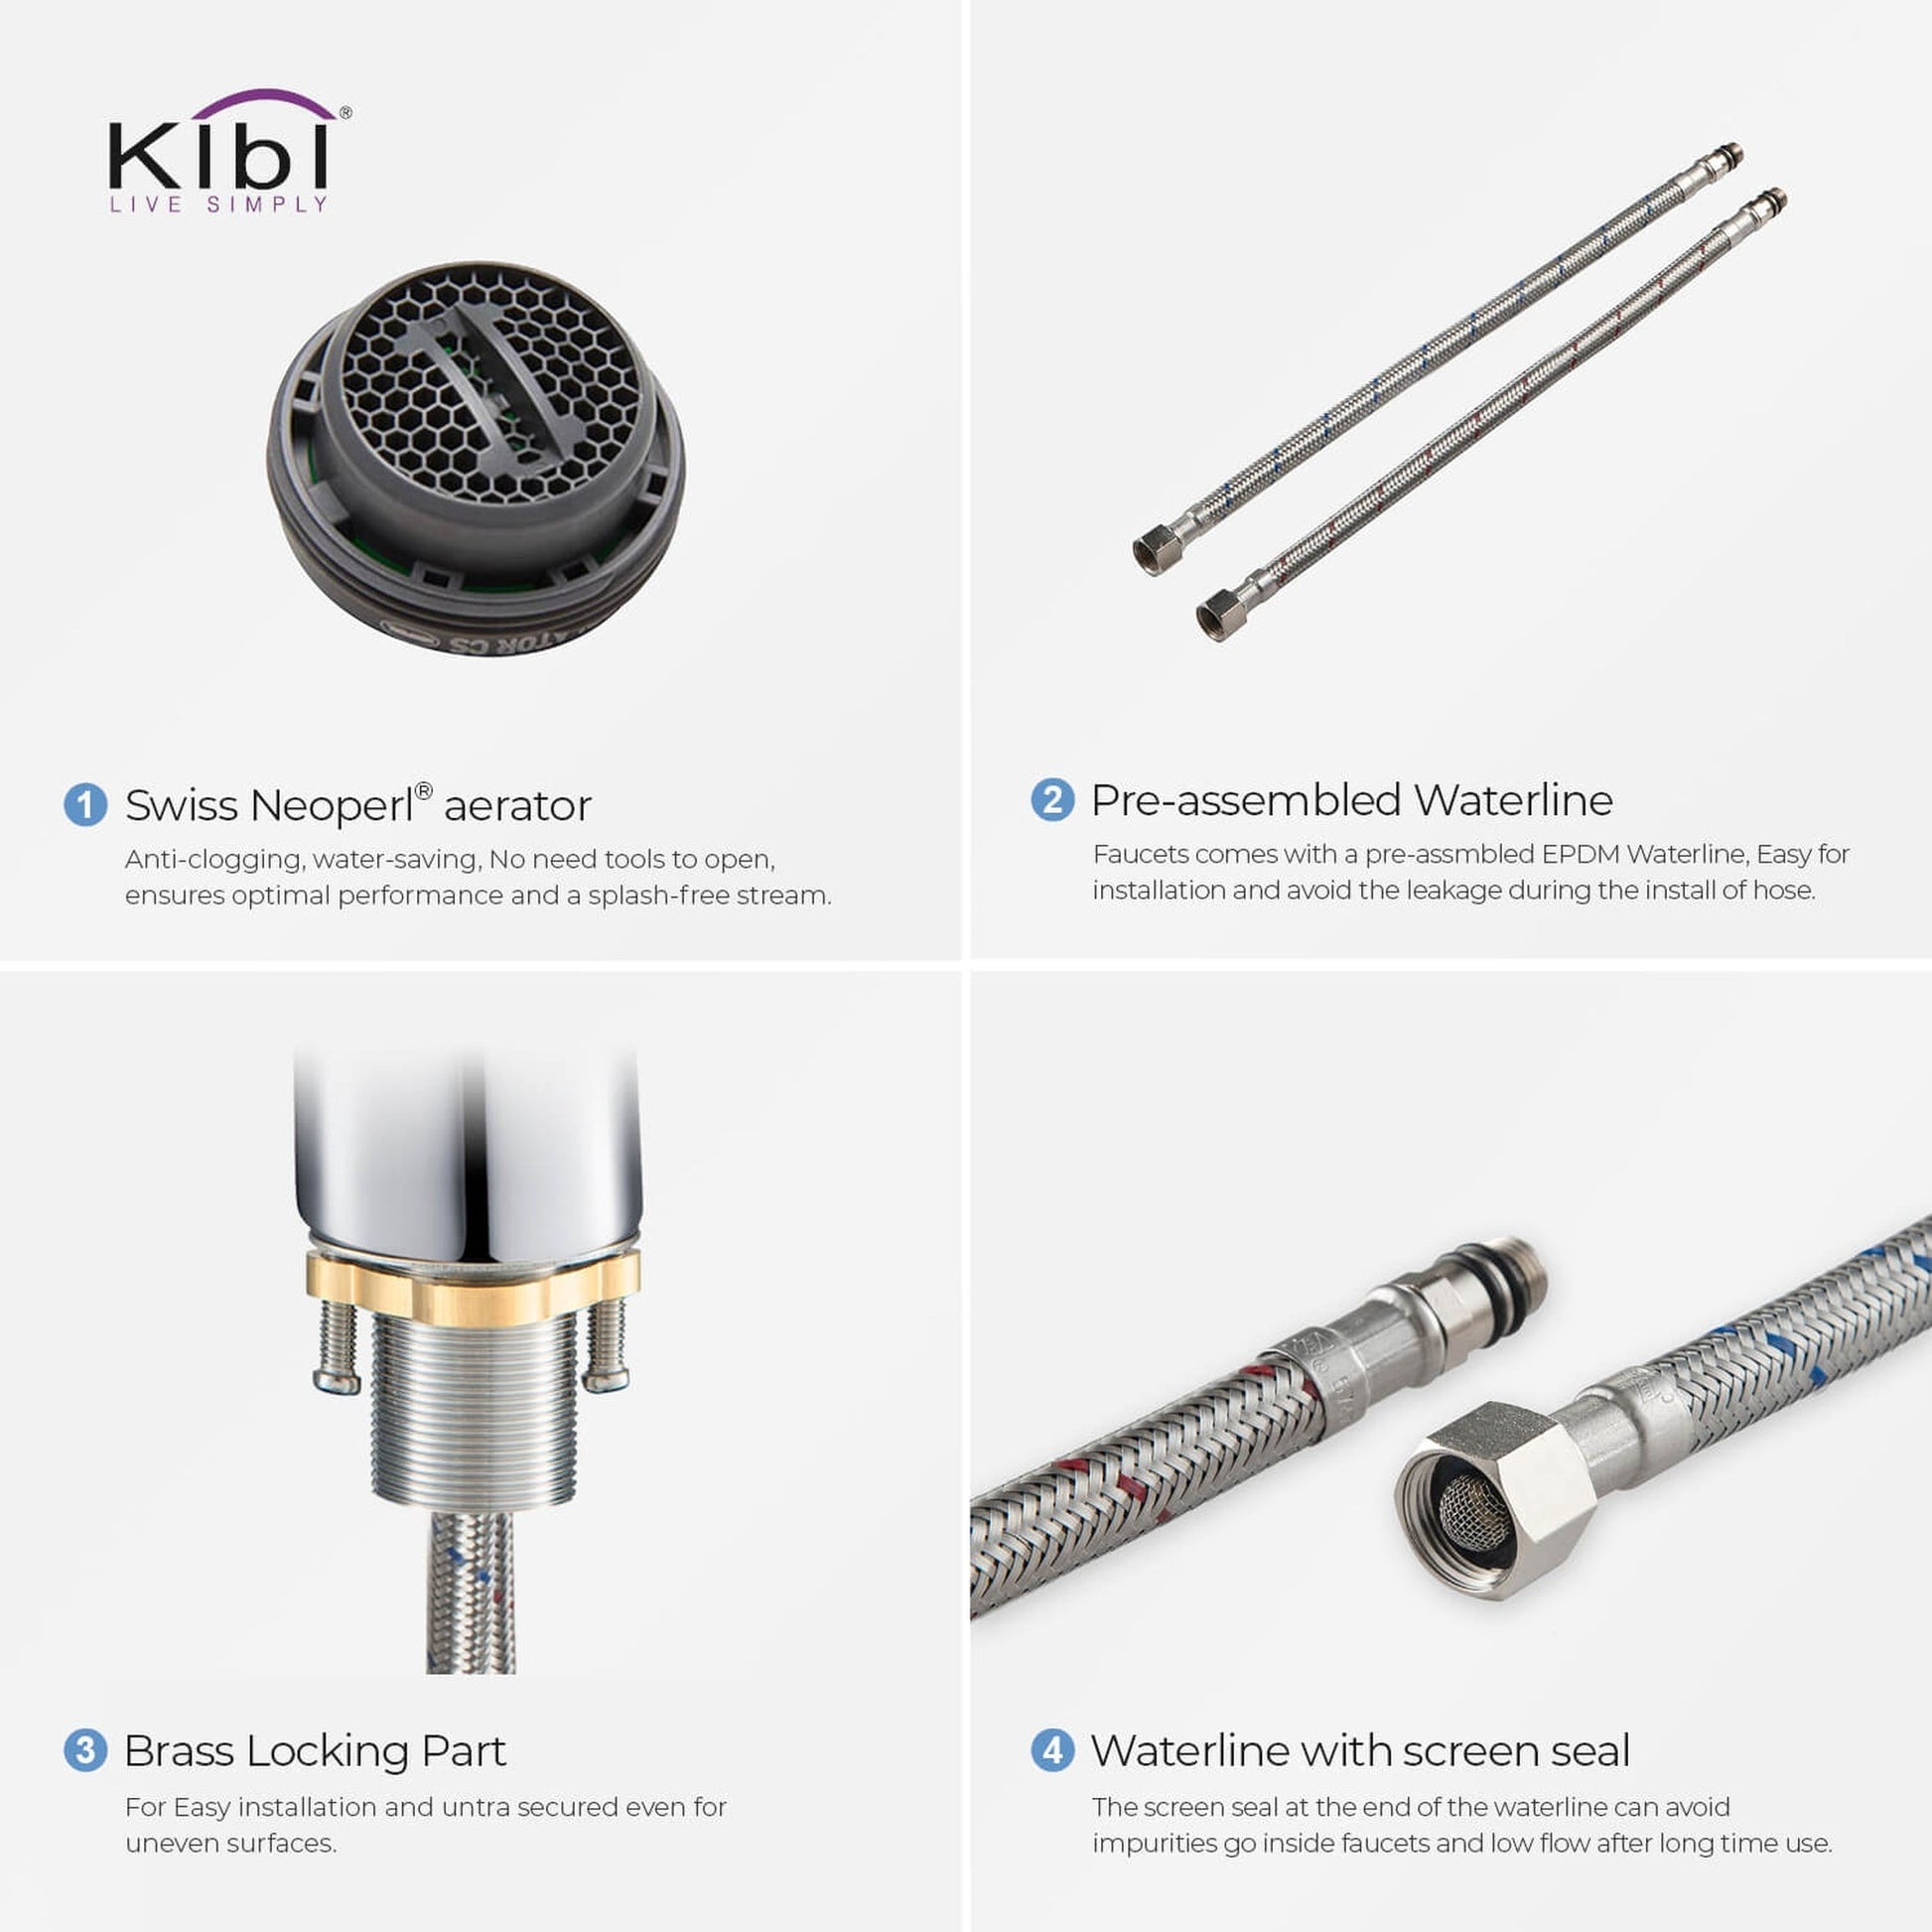 KIBI Harmony Single Handle Chrome Solid Brass Bathroom Sink Faucet With Pop-Up Drain Stopper Small Cover With Overflow